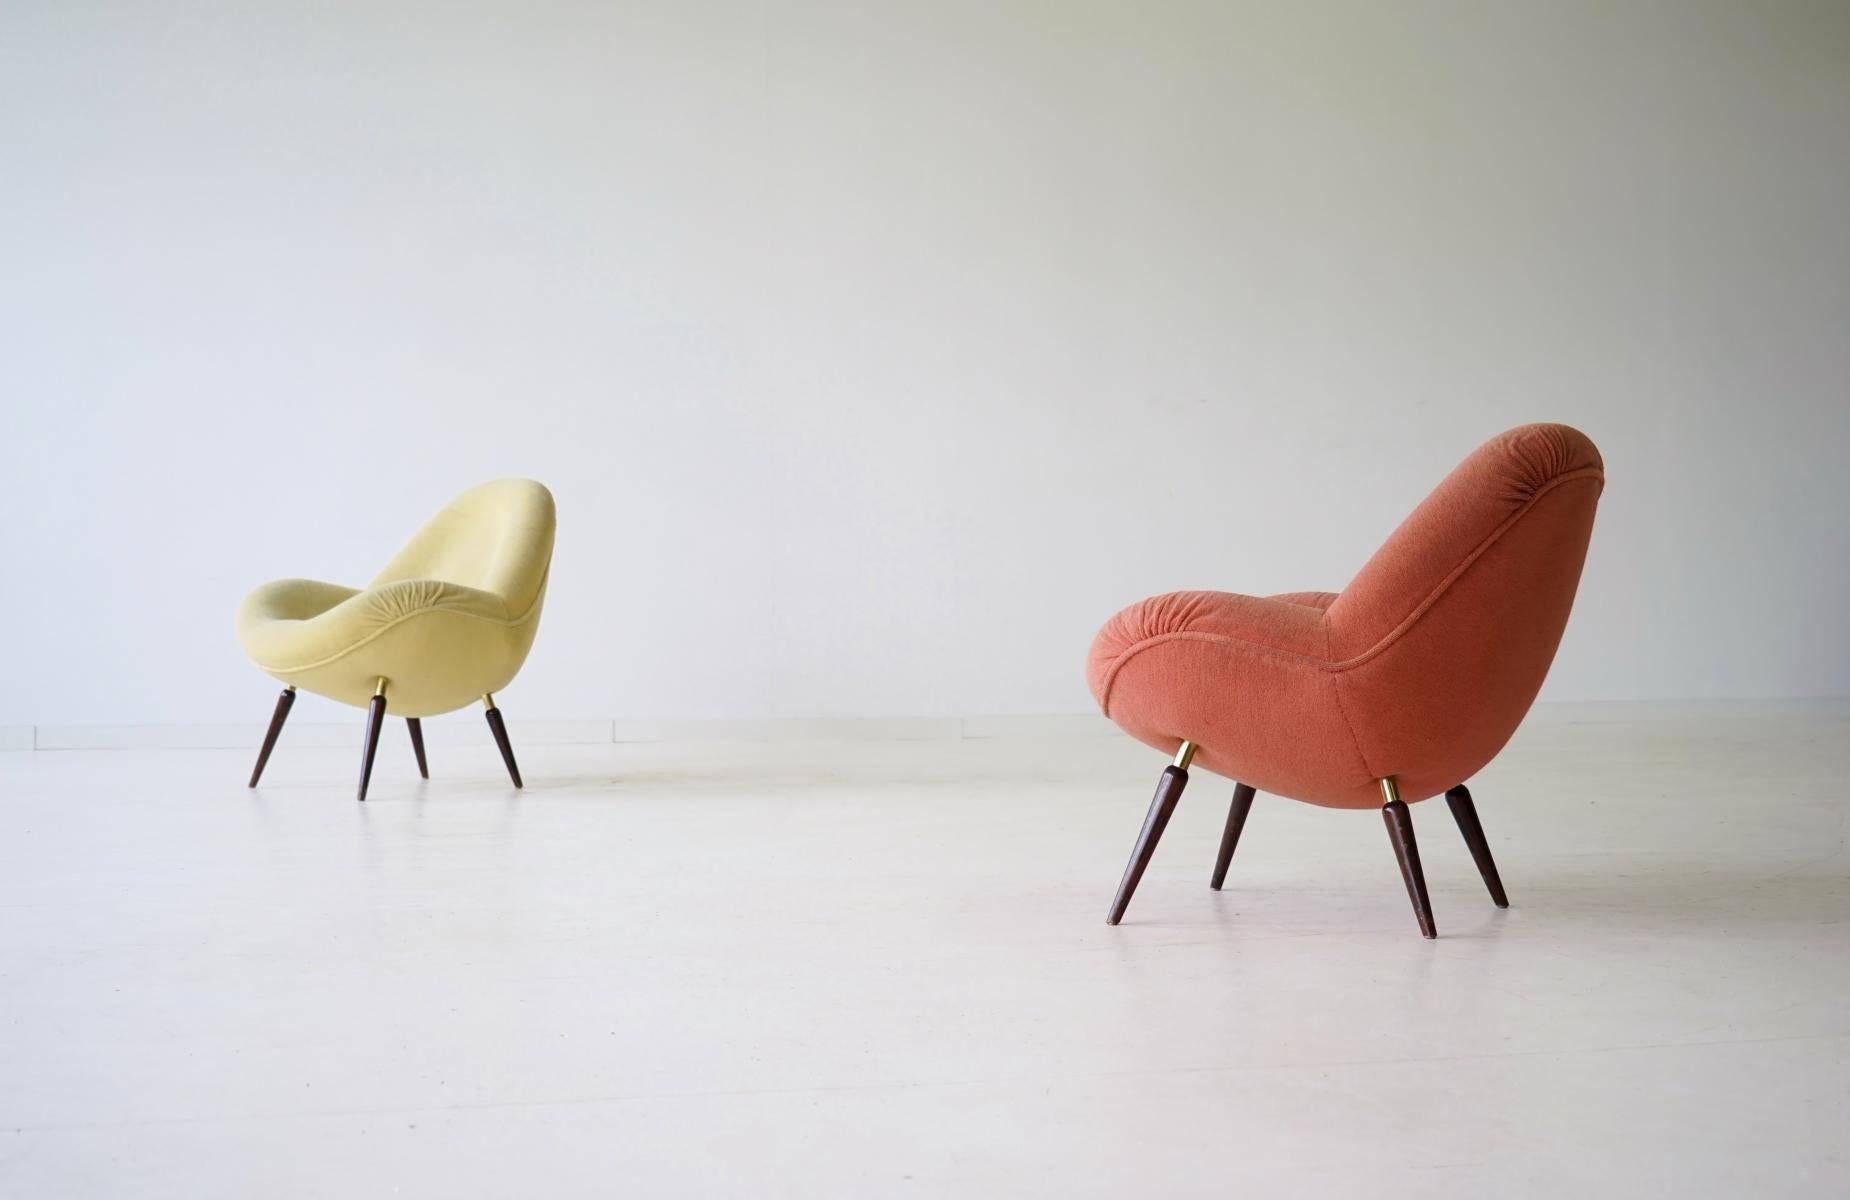 Fritz Neth for Correcta, armchair lounge easy chair, 1950s, Germany
Set of two chair of the 1950s
German design by Fritz Neth for Correcta. Organically shaped seat shell with internal steel frame. 
Cover original fabric / velvet. Legs made of